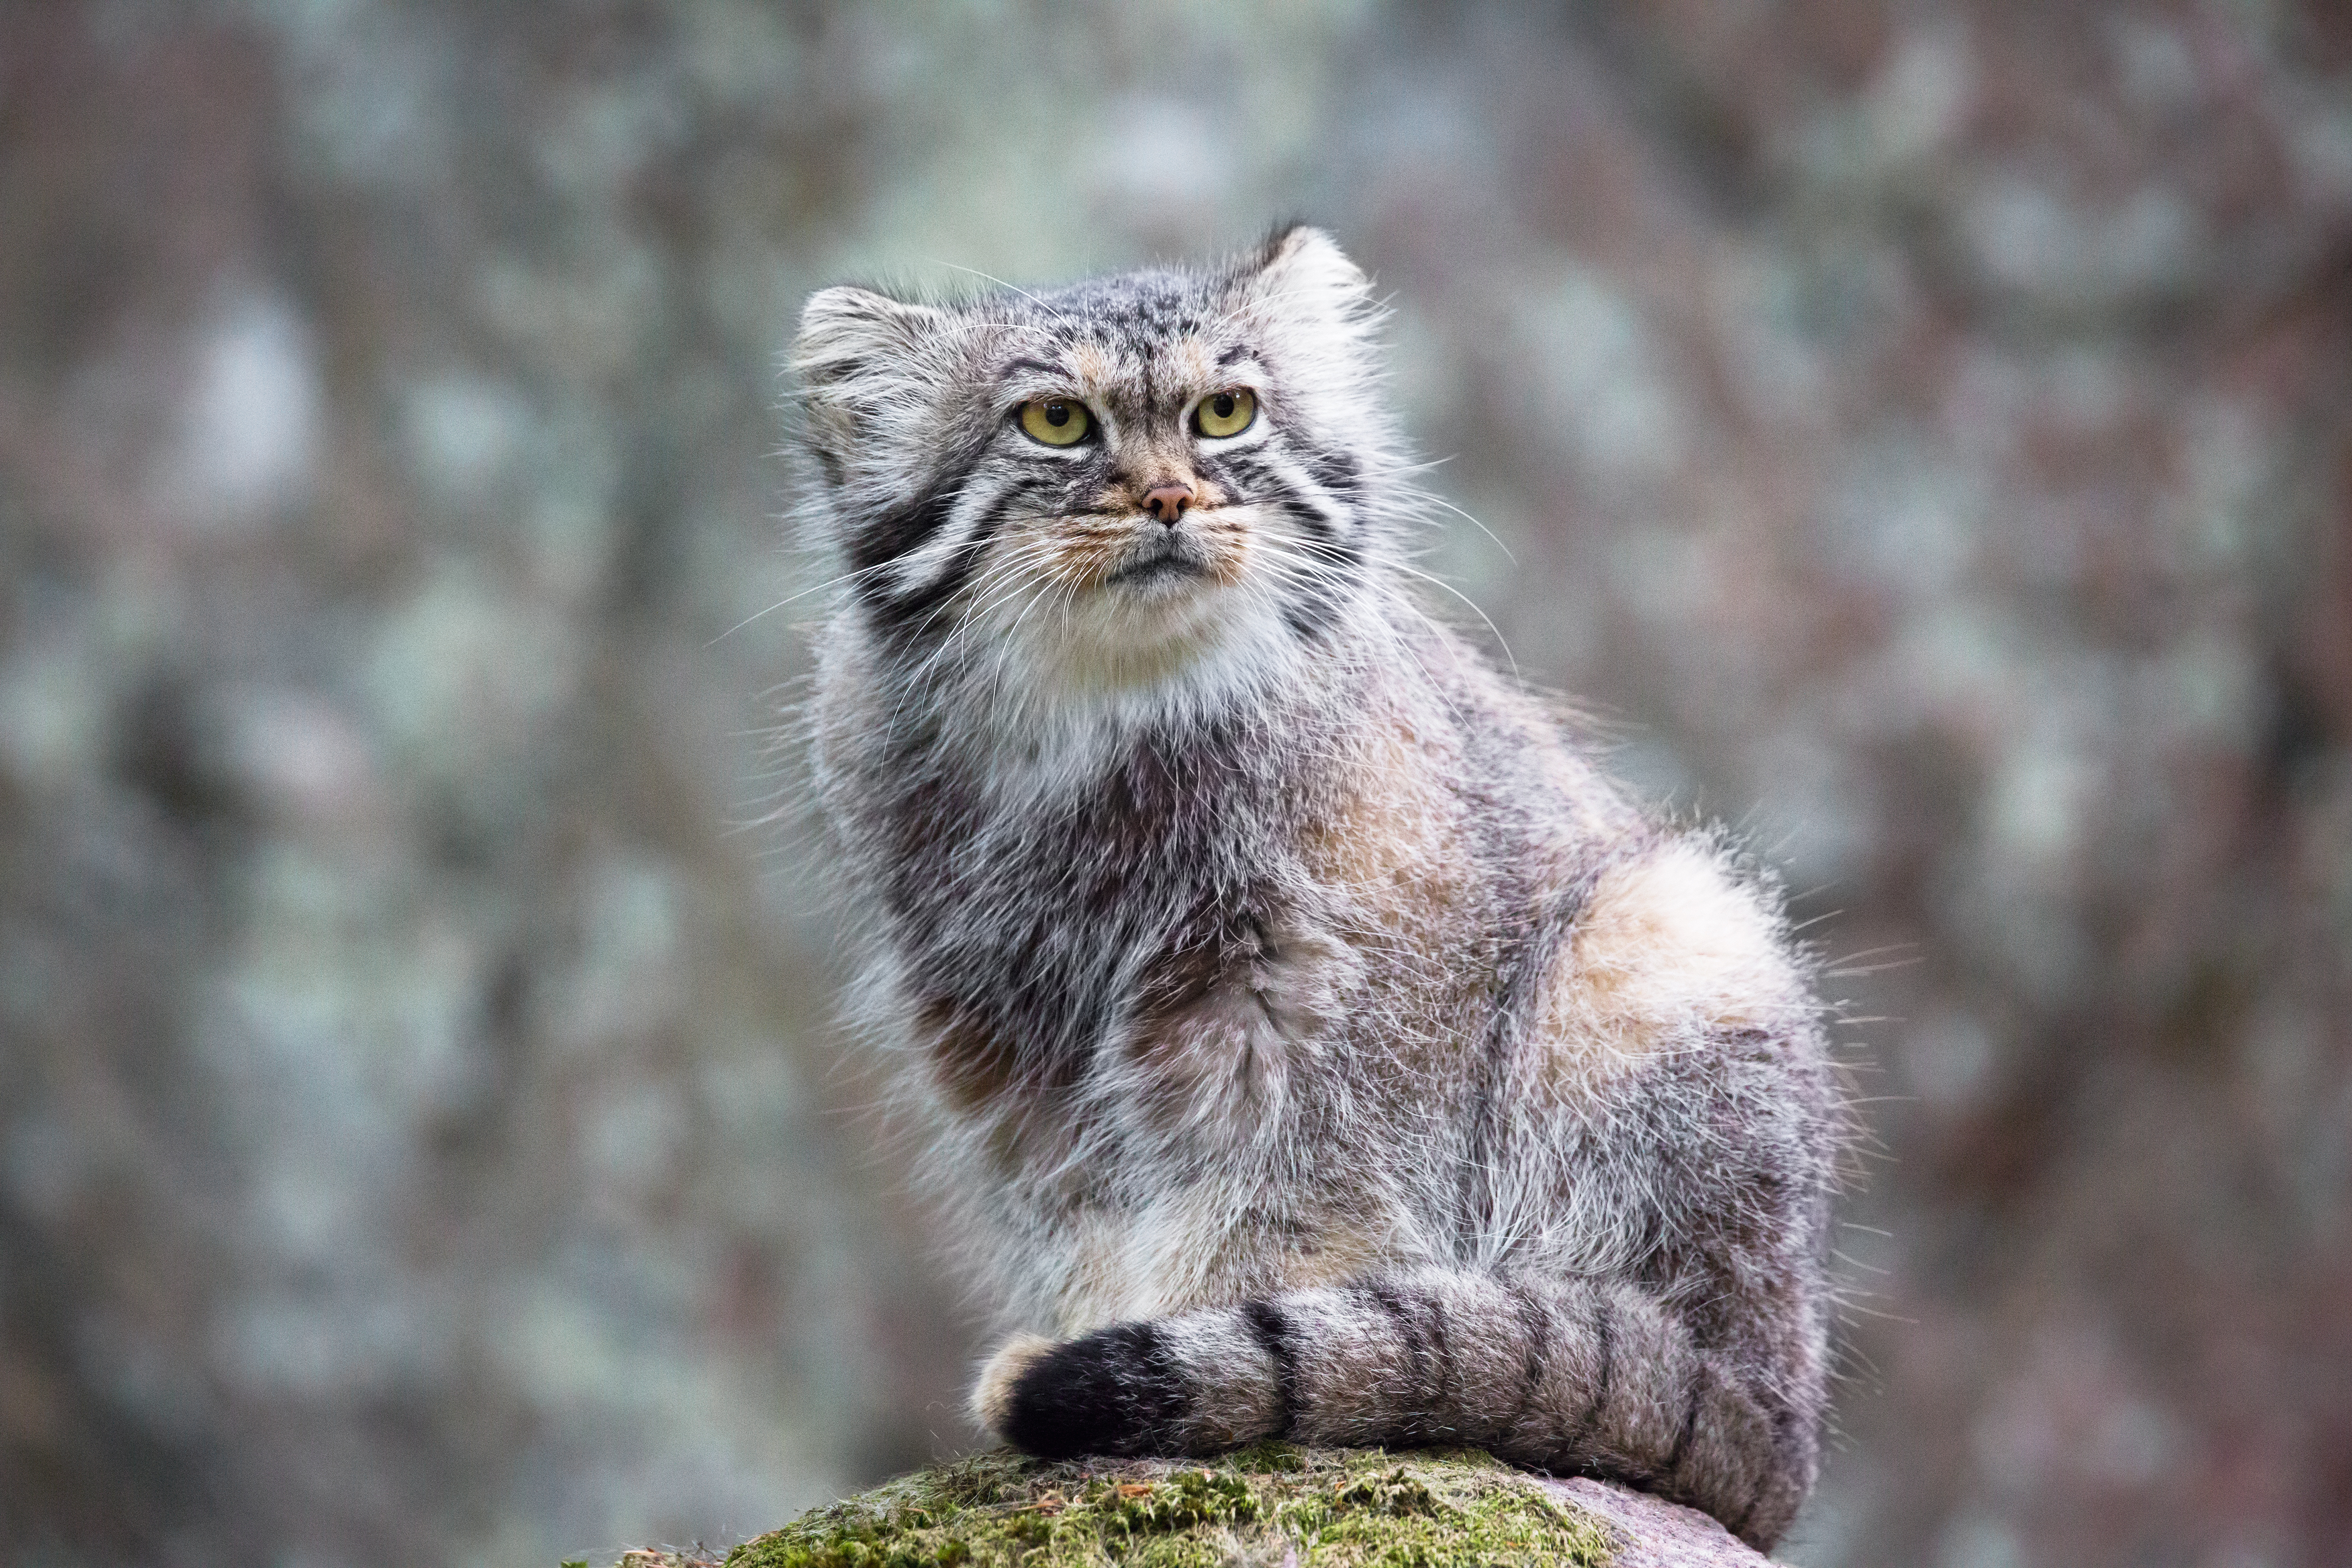 Know Your Cat - Pallas Cat